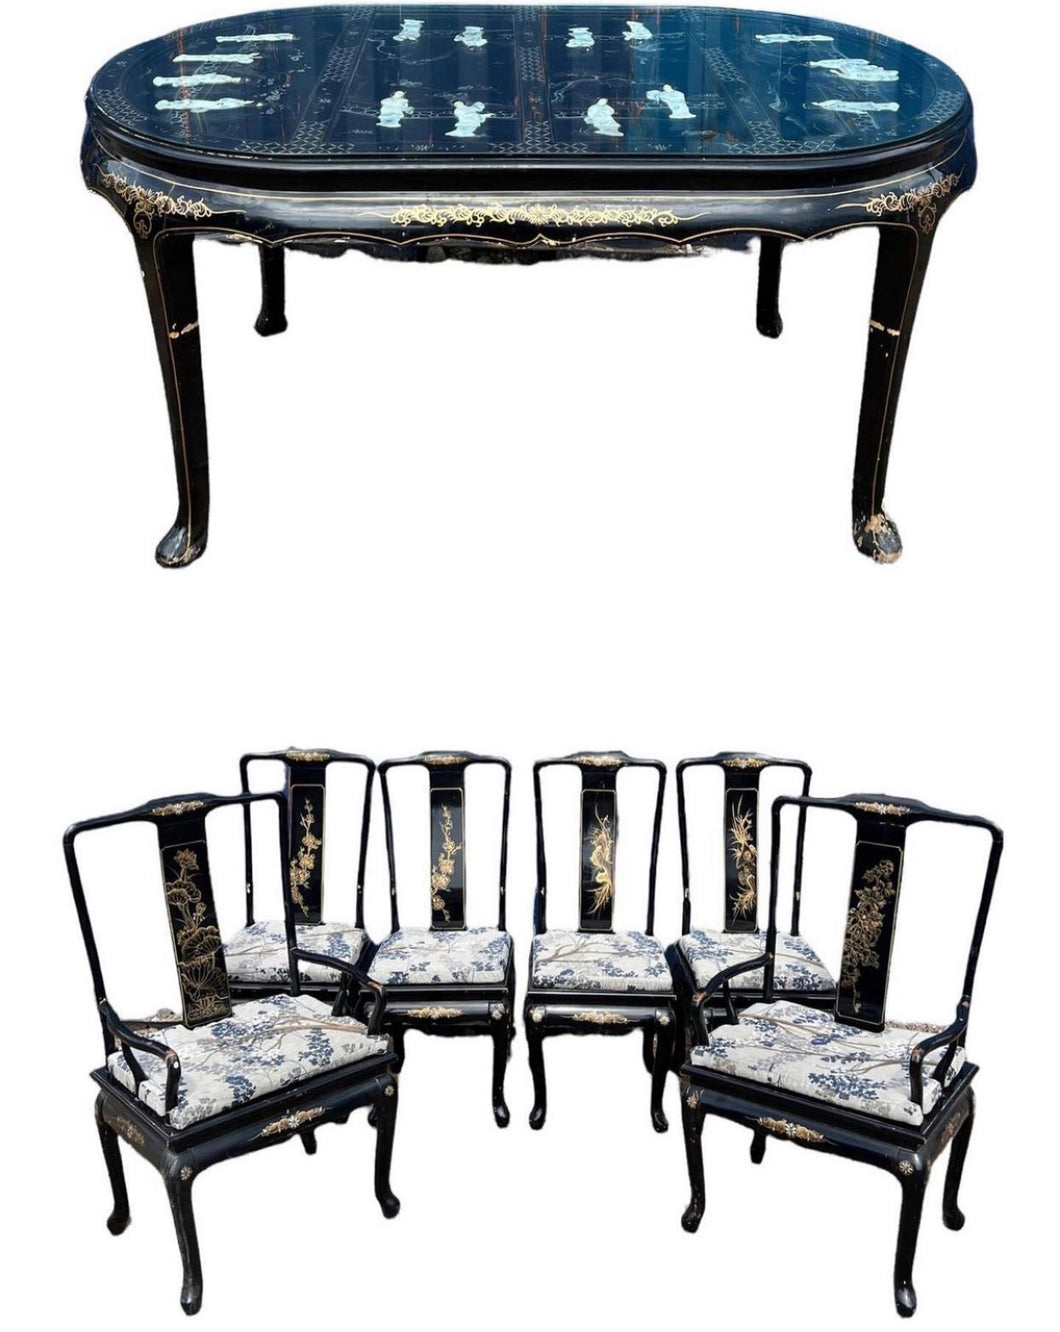 20TH CENTURY CHINESE ORIENTAL BLACK LACQUERED DINING TABLE & 6 DINING CHAIRS, C1970